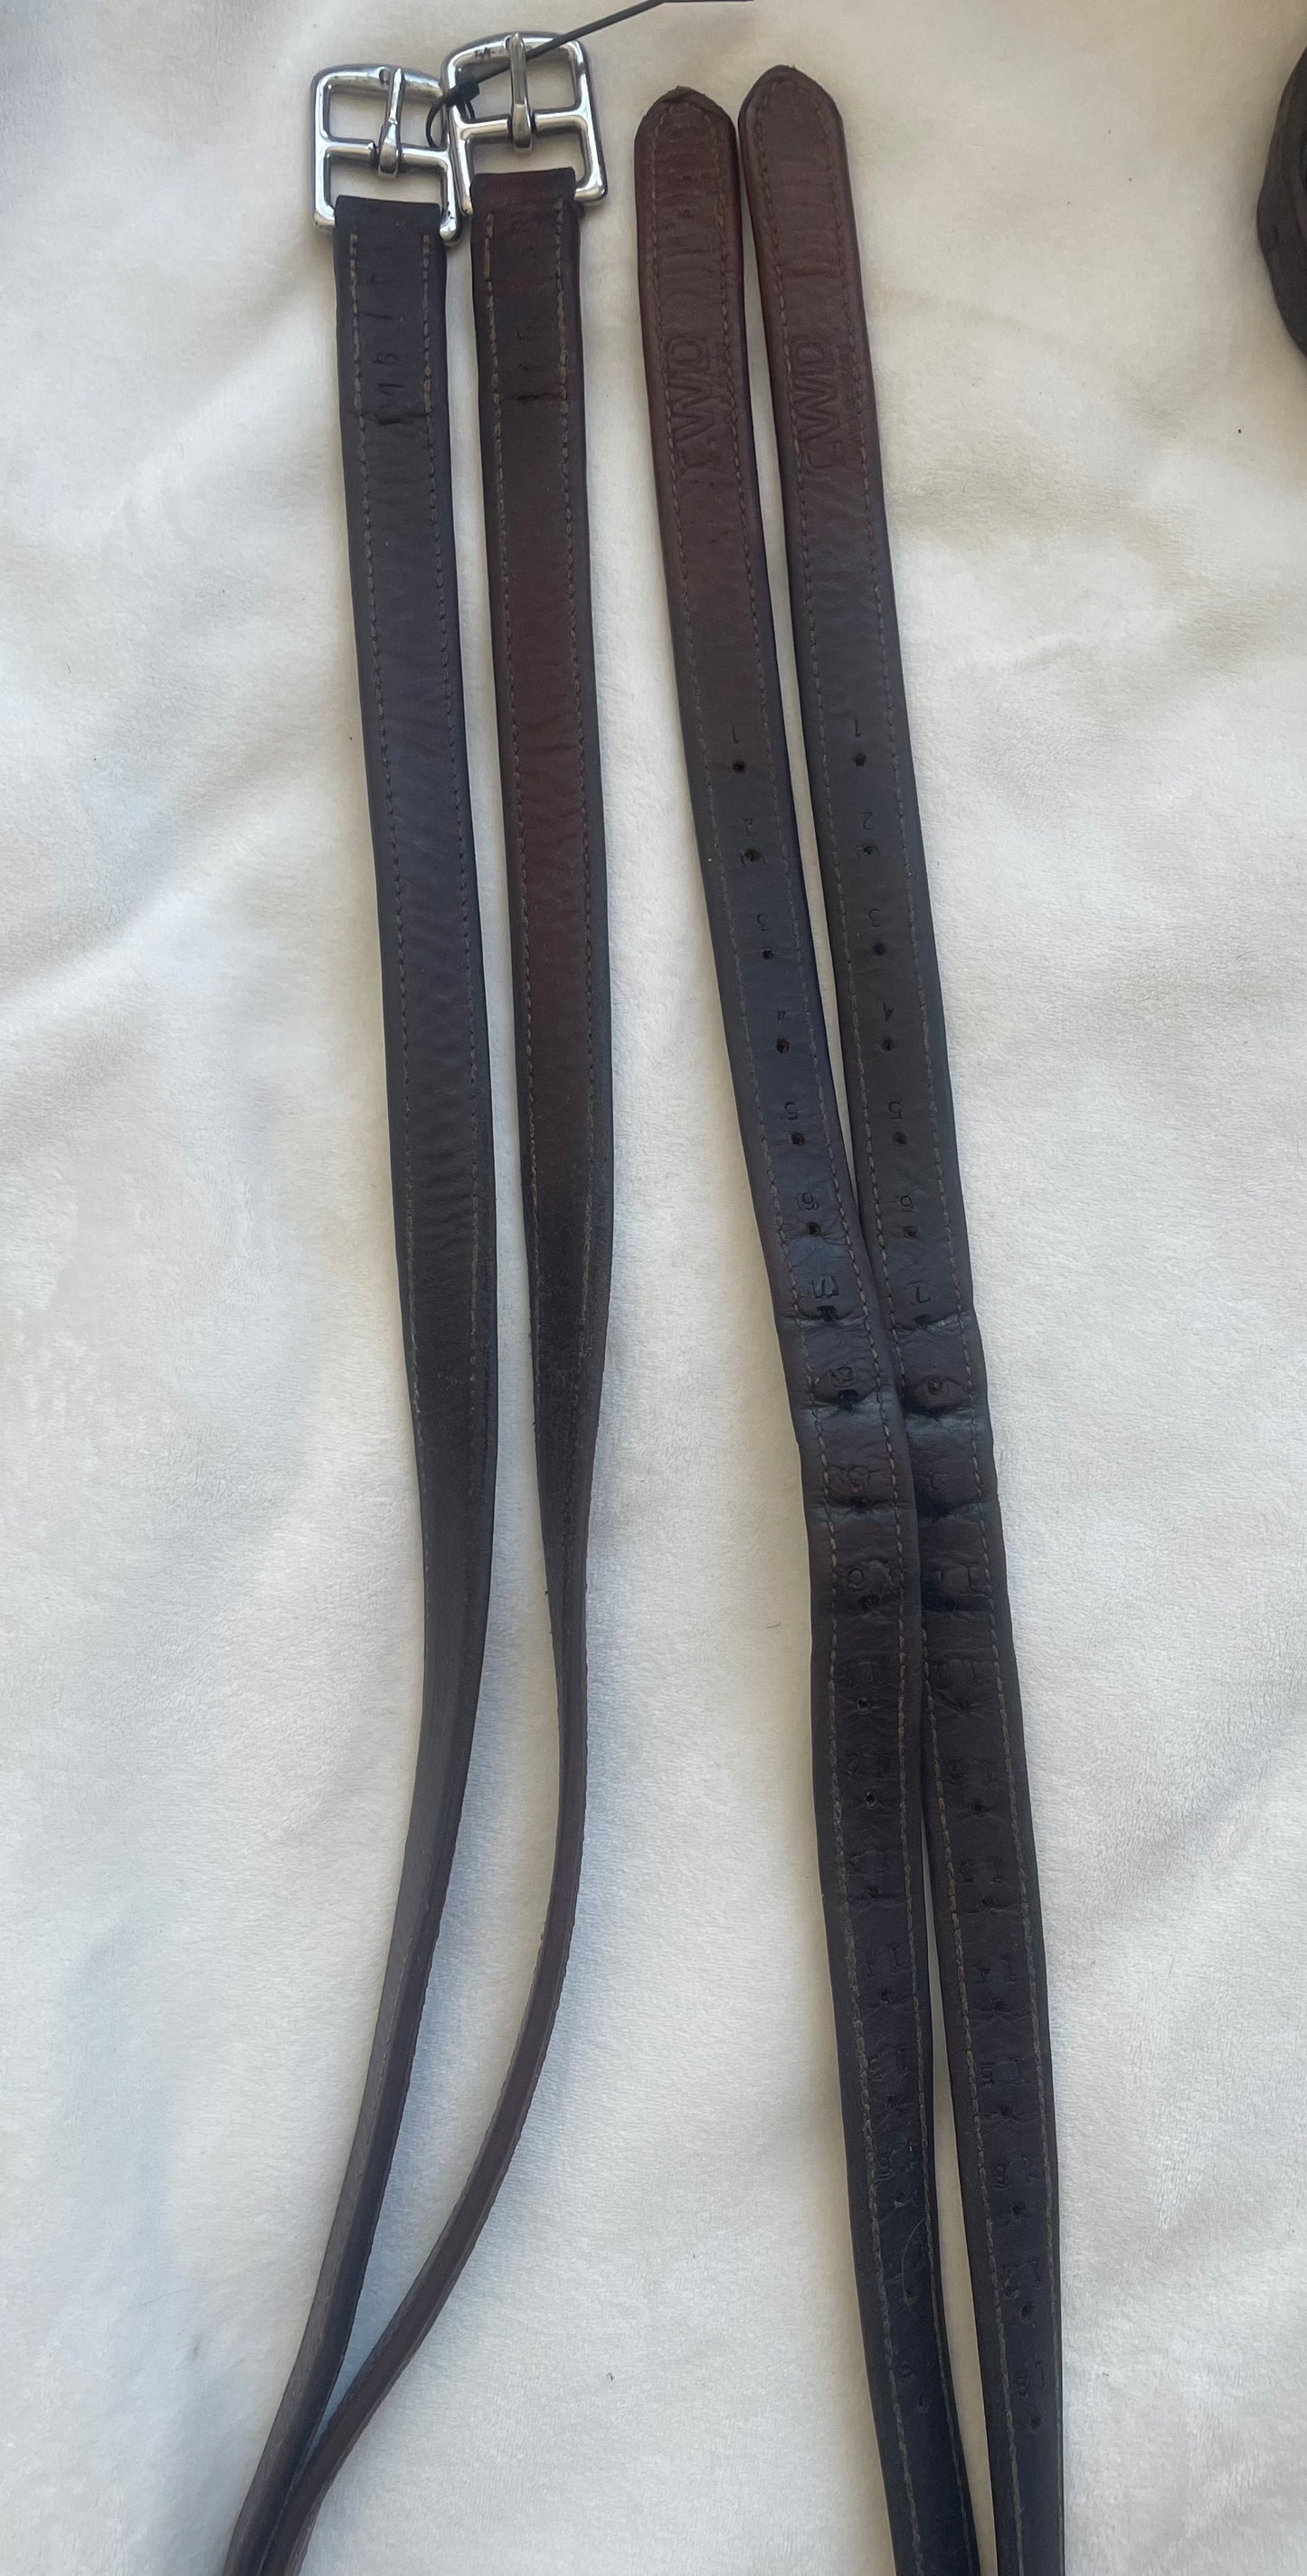 CWD Stirrup Leathers, Used Condition - 145cm/58”